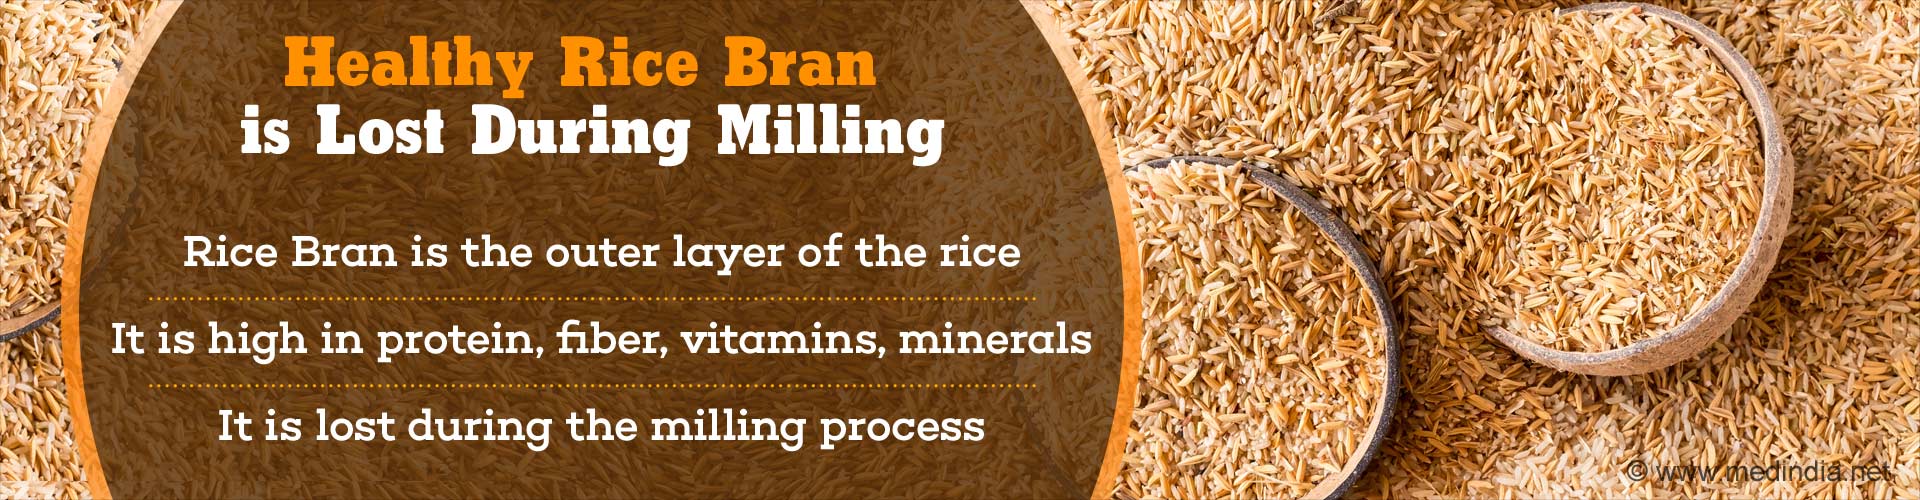 Healthy Rice Bran is Lost During Milling
- Rice bran is the outer layer of the rice
- It is high in protein, fiber, vitamins, minerals
- It is lost during the milling process